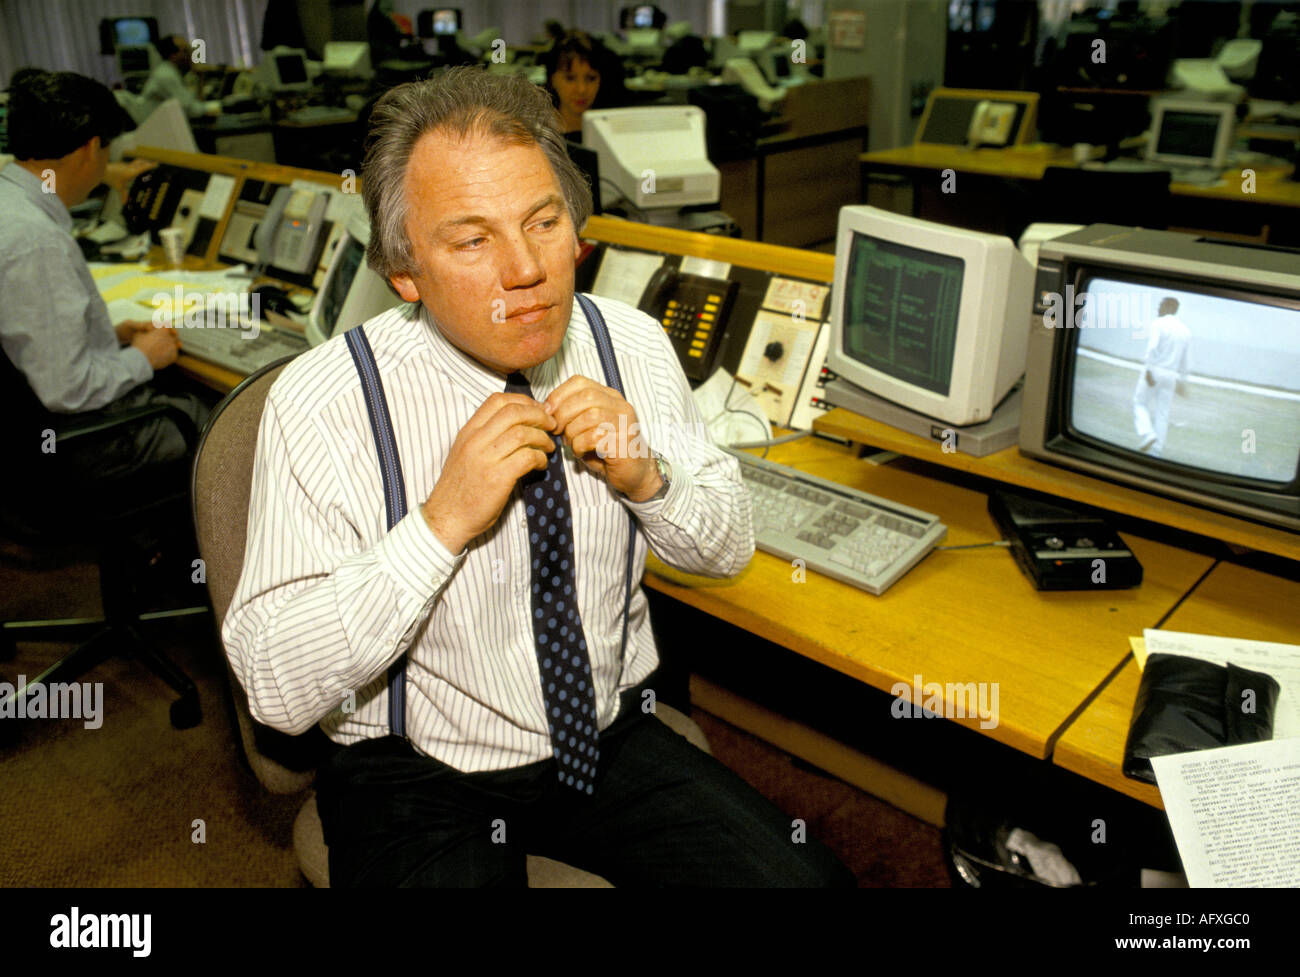 Peter Sissons portrait British television news presenter fixing tie in news room. 1980s circa 1985 LOndon England UK HOMER SYKES Stock Photo